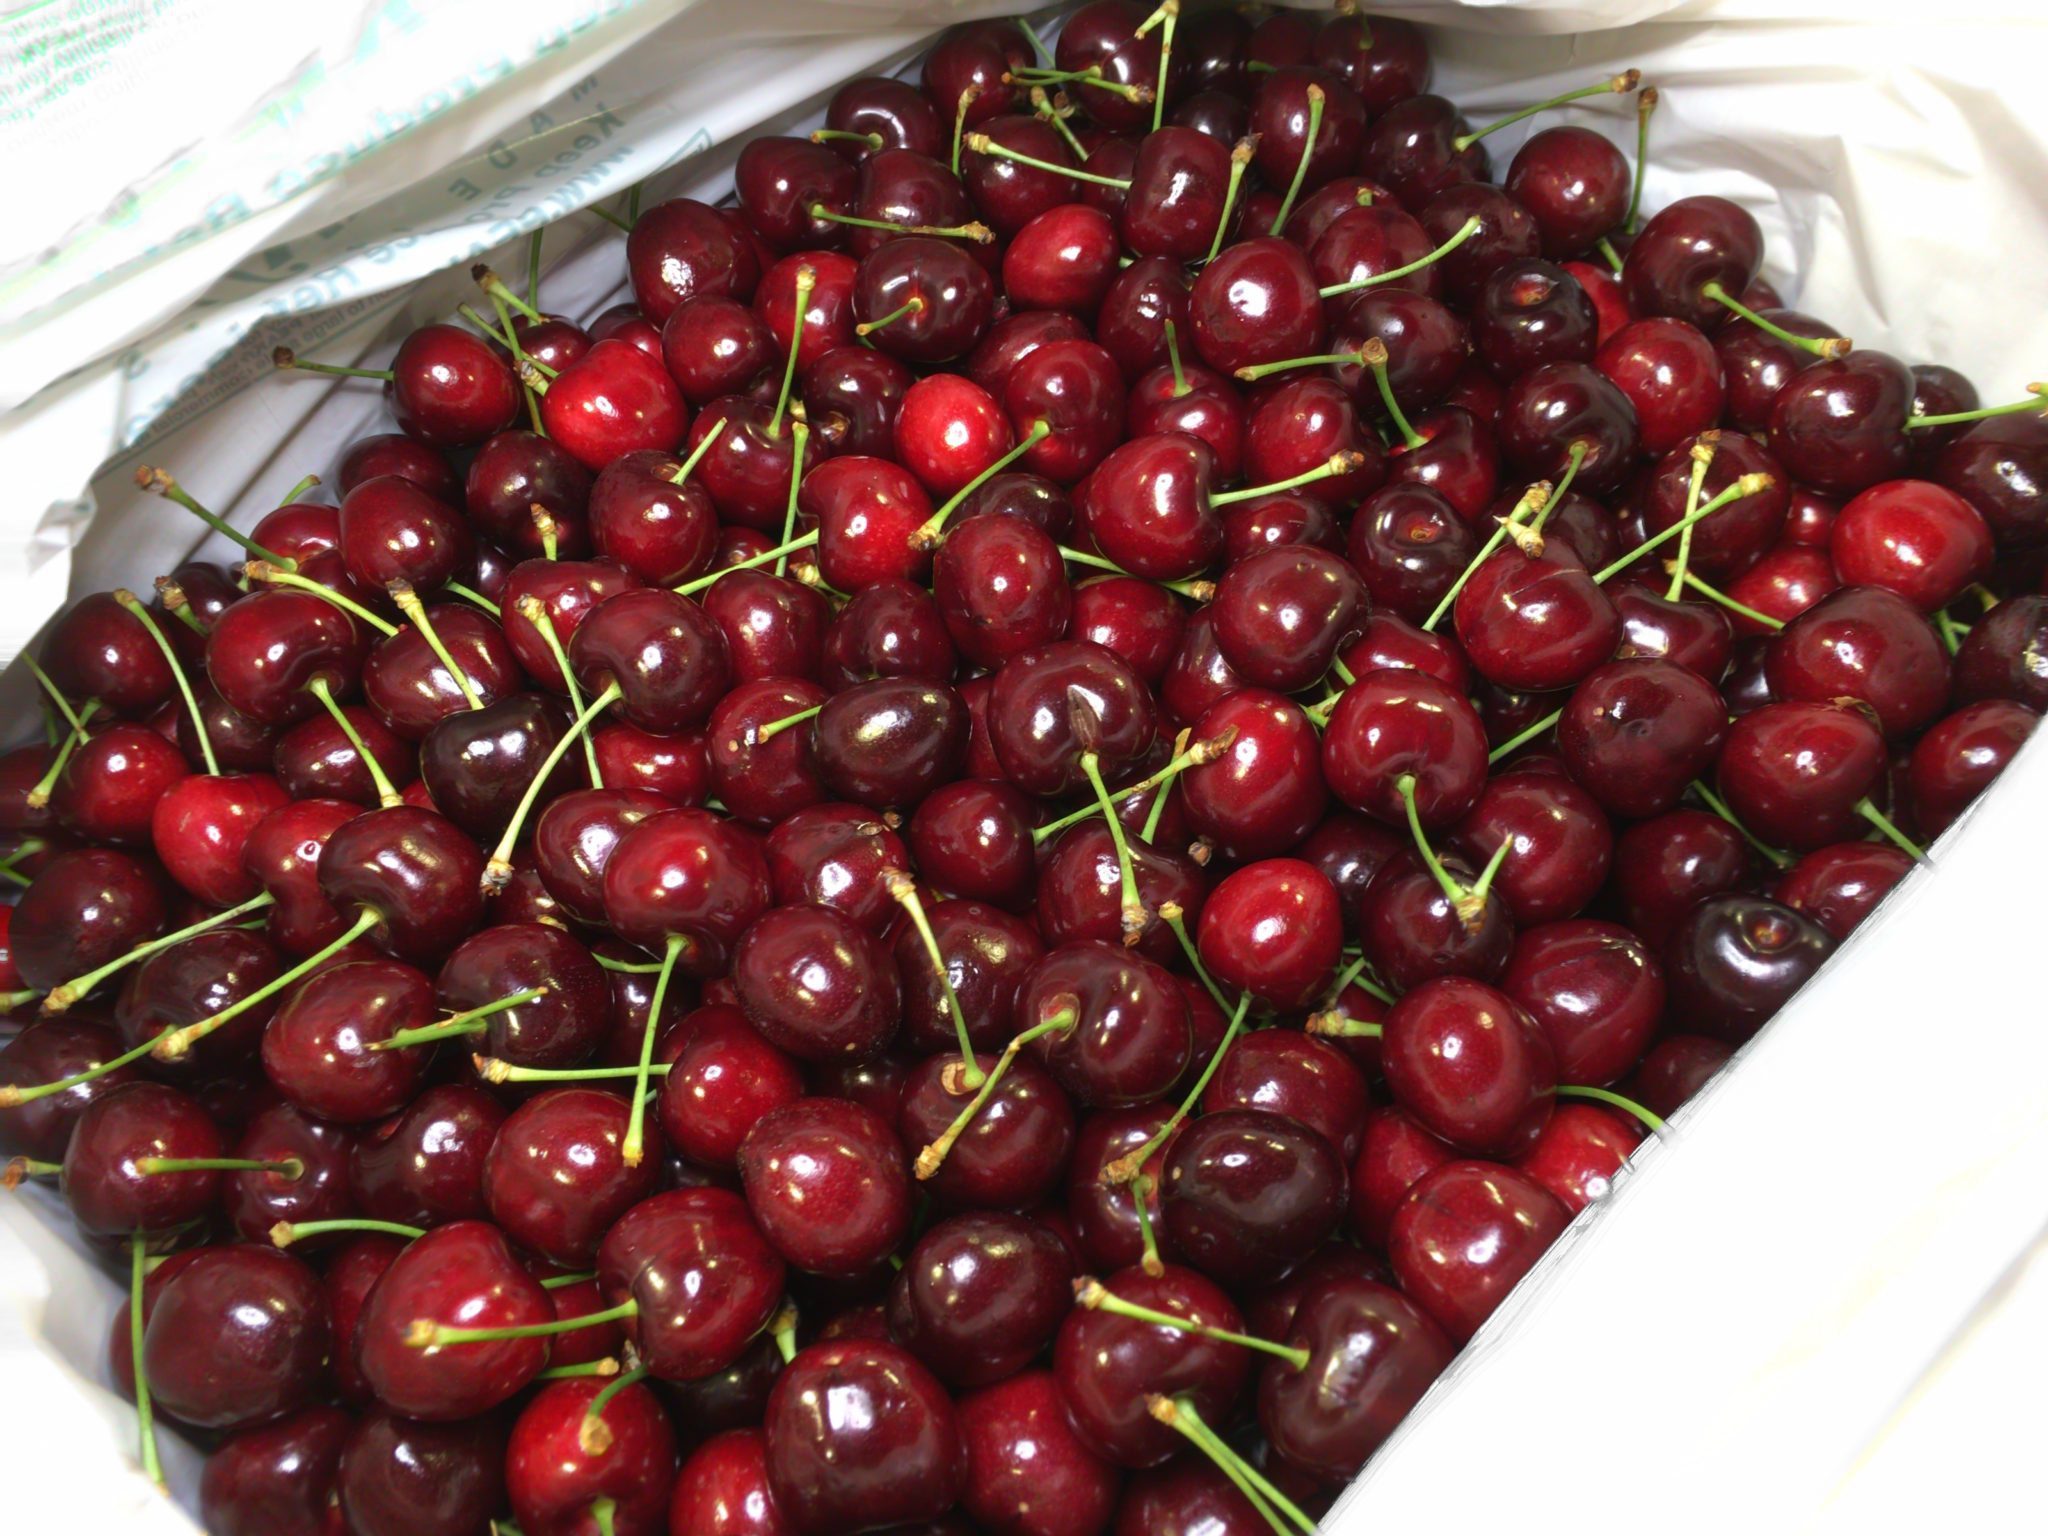 The Puget Sound Business Journal interviews our very own Don Ehrlich about cherries and tariffs